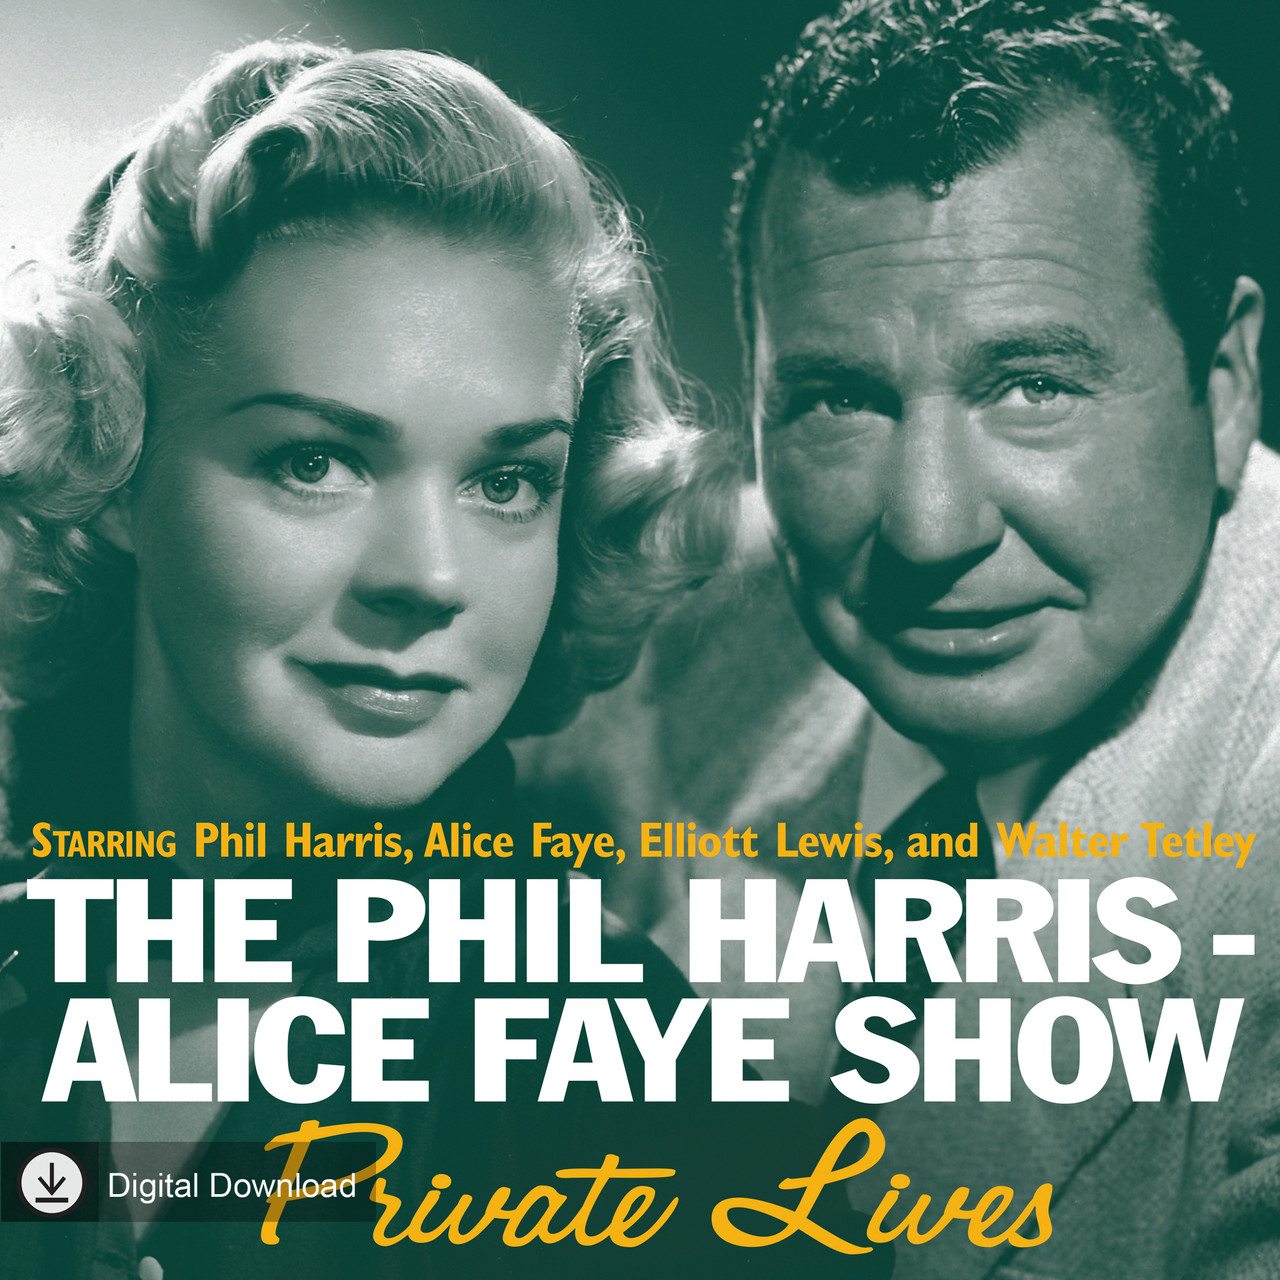 The Phil Harris Alice Faye Show: Private Lives (MP3 Download)